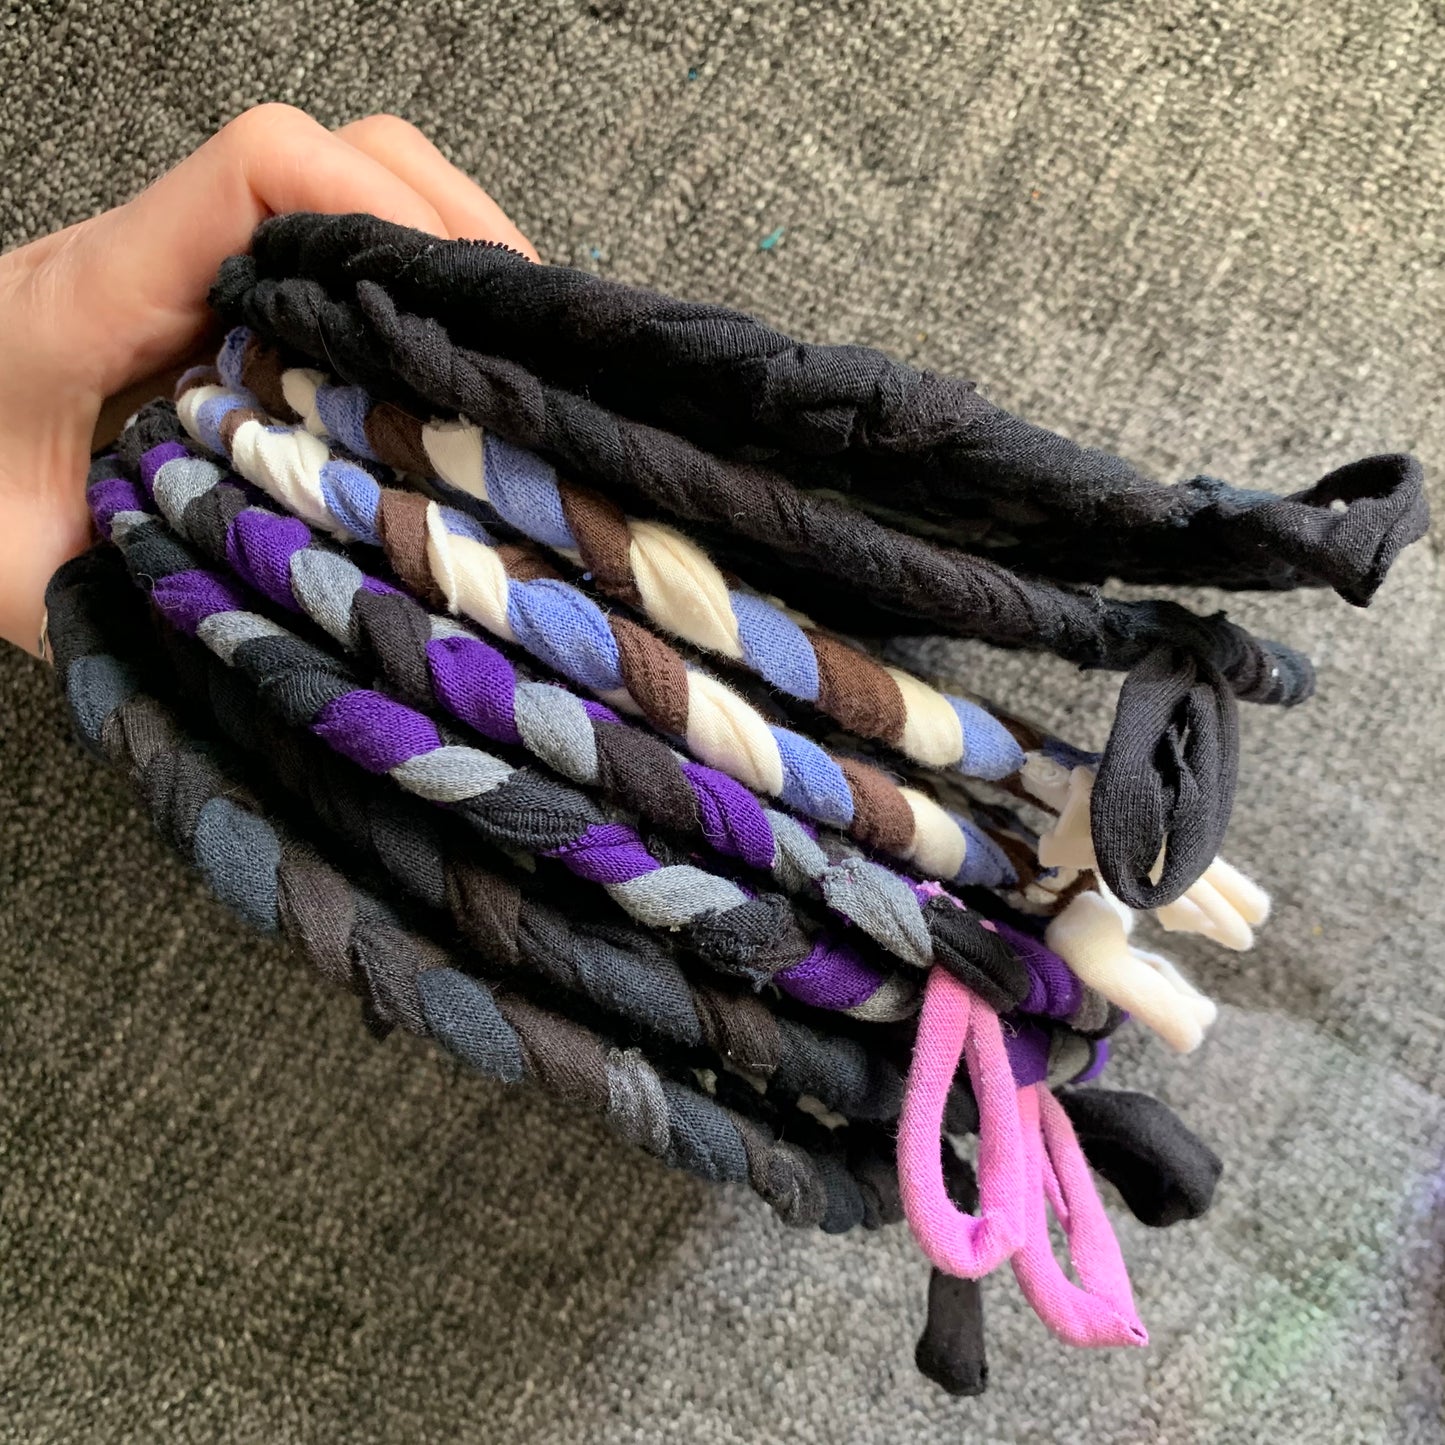 Group of dark purple and black trivet potholders, held by a hand, side view.